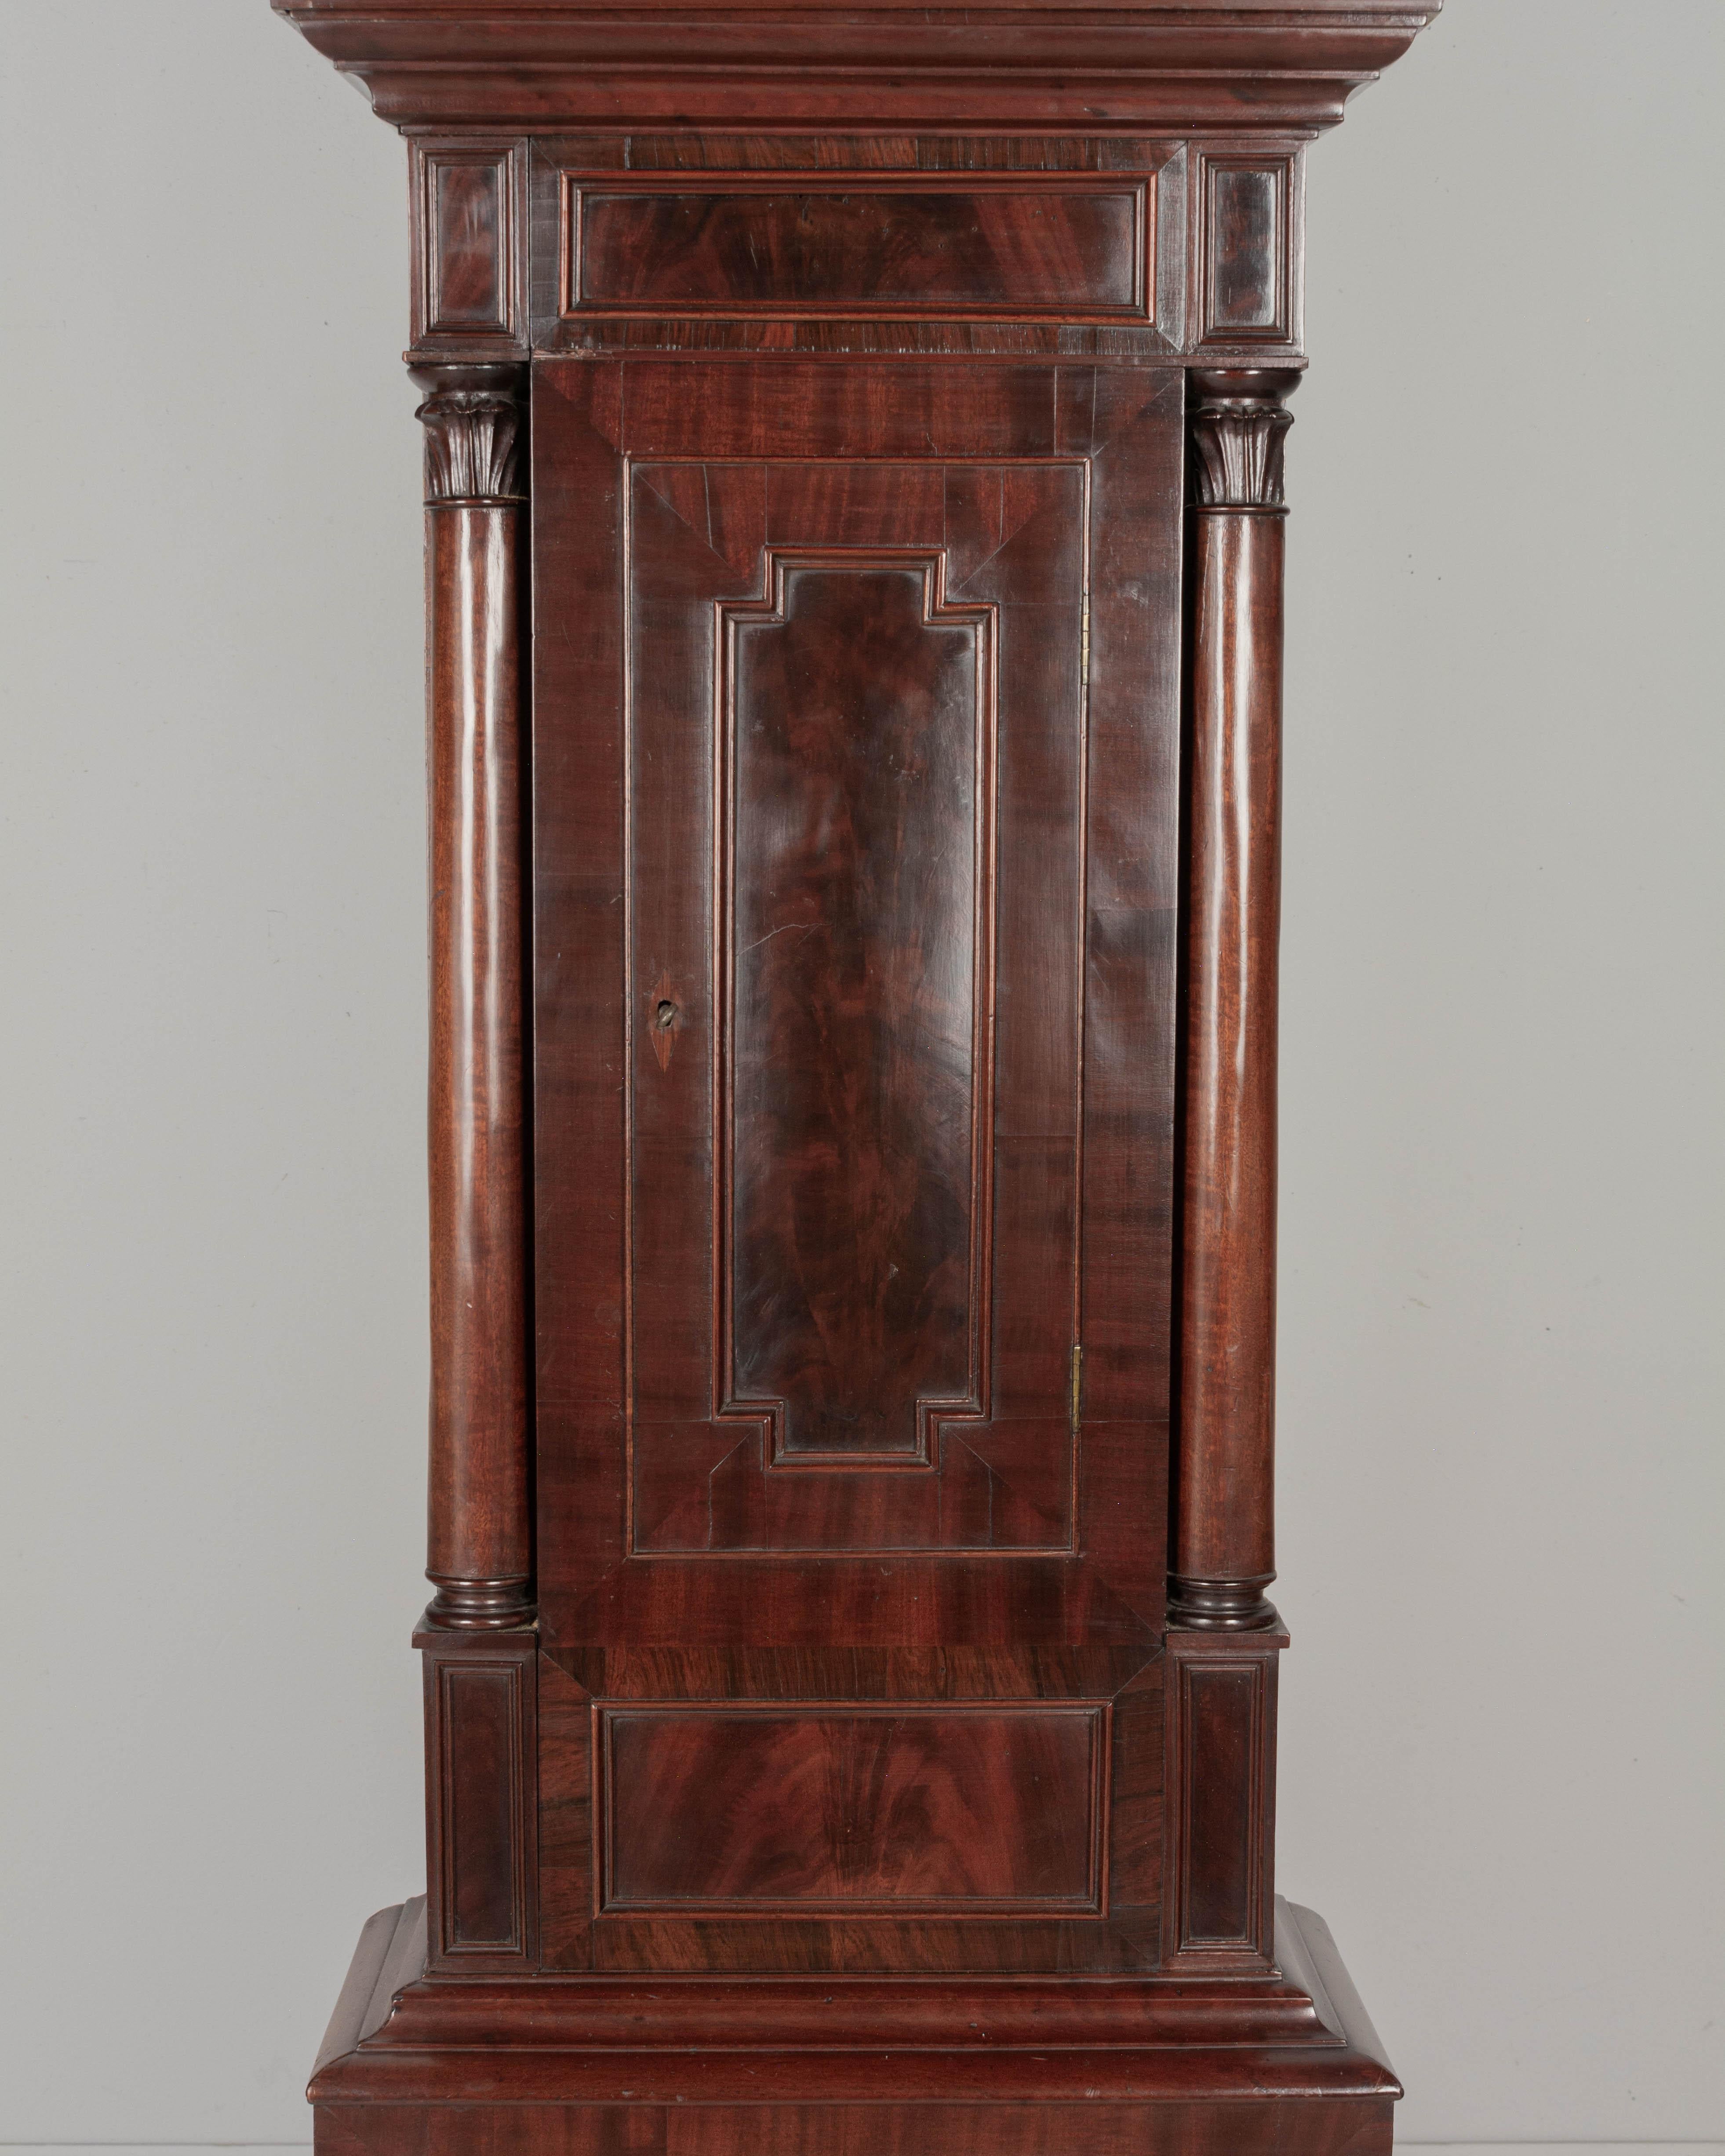 19th Century English Mahogany Tall Case Clock In Good Condition For Sale In Winter Park, FL